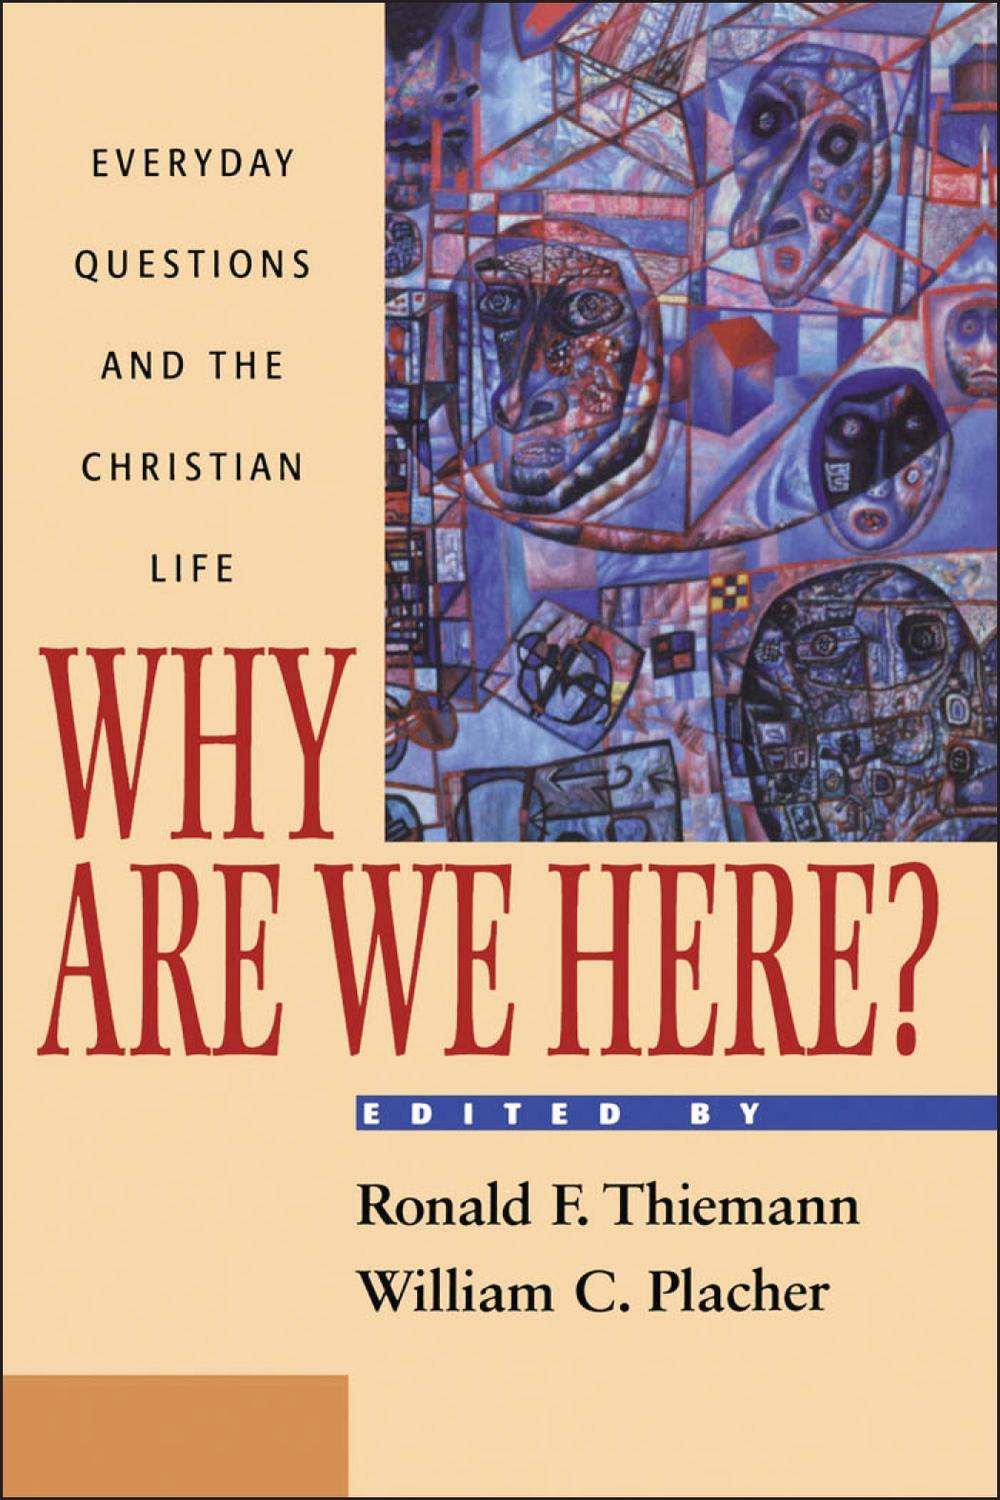 Why Are We Here? - Ronald F. Thiemann, William C. Placher